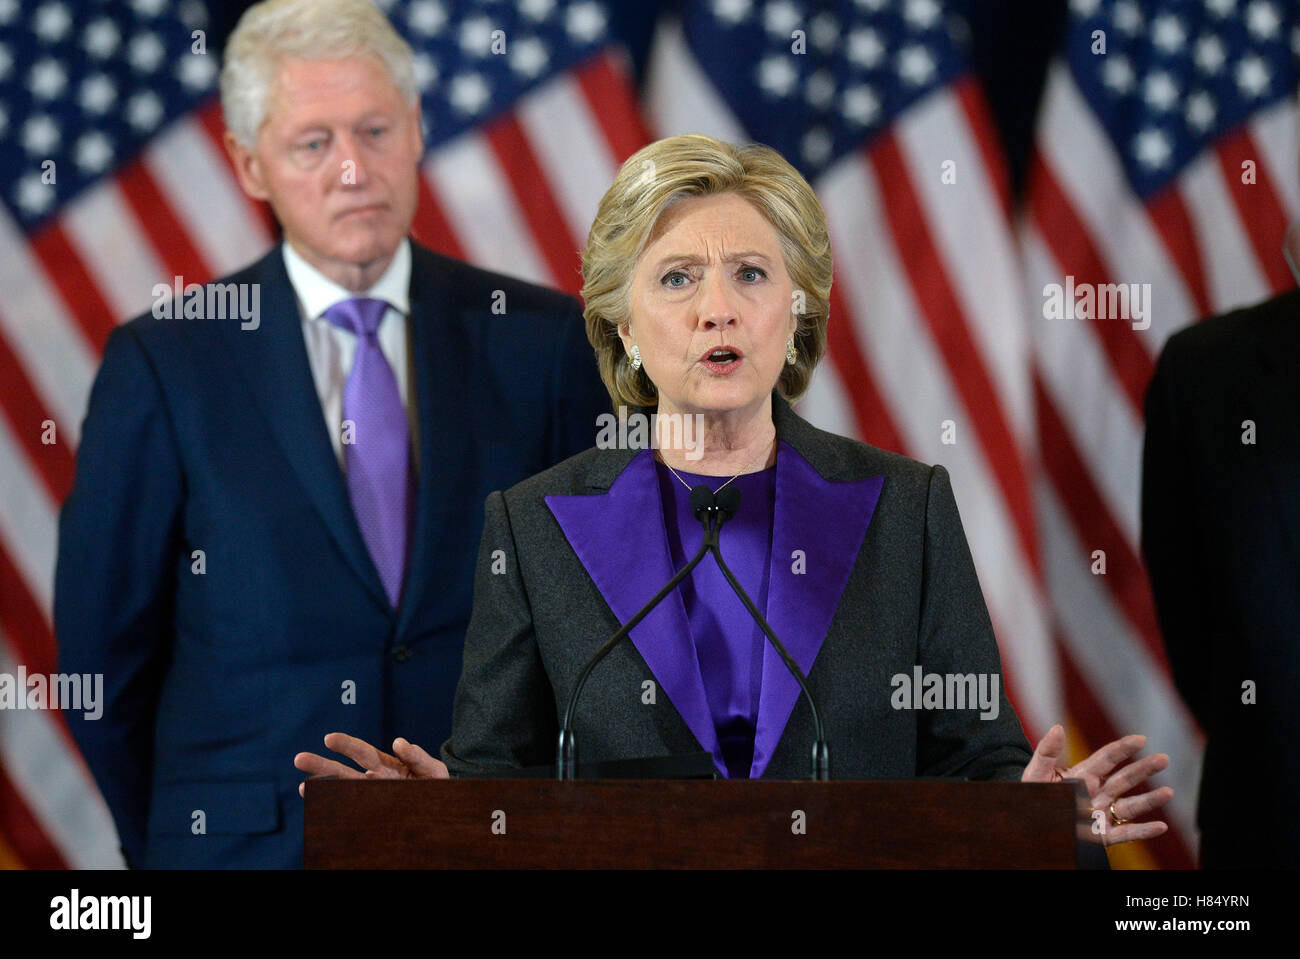 New York, USA. 9th November, 2016. Democratic Presidential candidate Hillary Clinton delivers her concession speech Wednesday, from the New Yorker Hotel's Grand Ballroom in New York, NY, on November 9, 2016. Credit: Olivier Douliery/Pool via CNP /MediaPunch Credit:  MediaPunch Inc/Alamy Live News Stock Photo